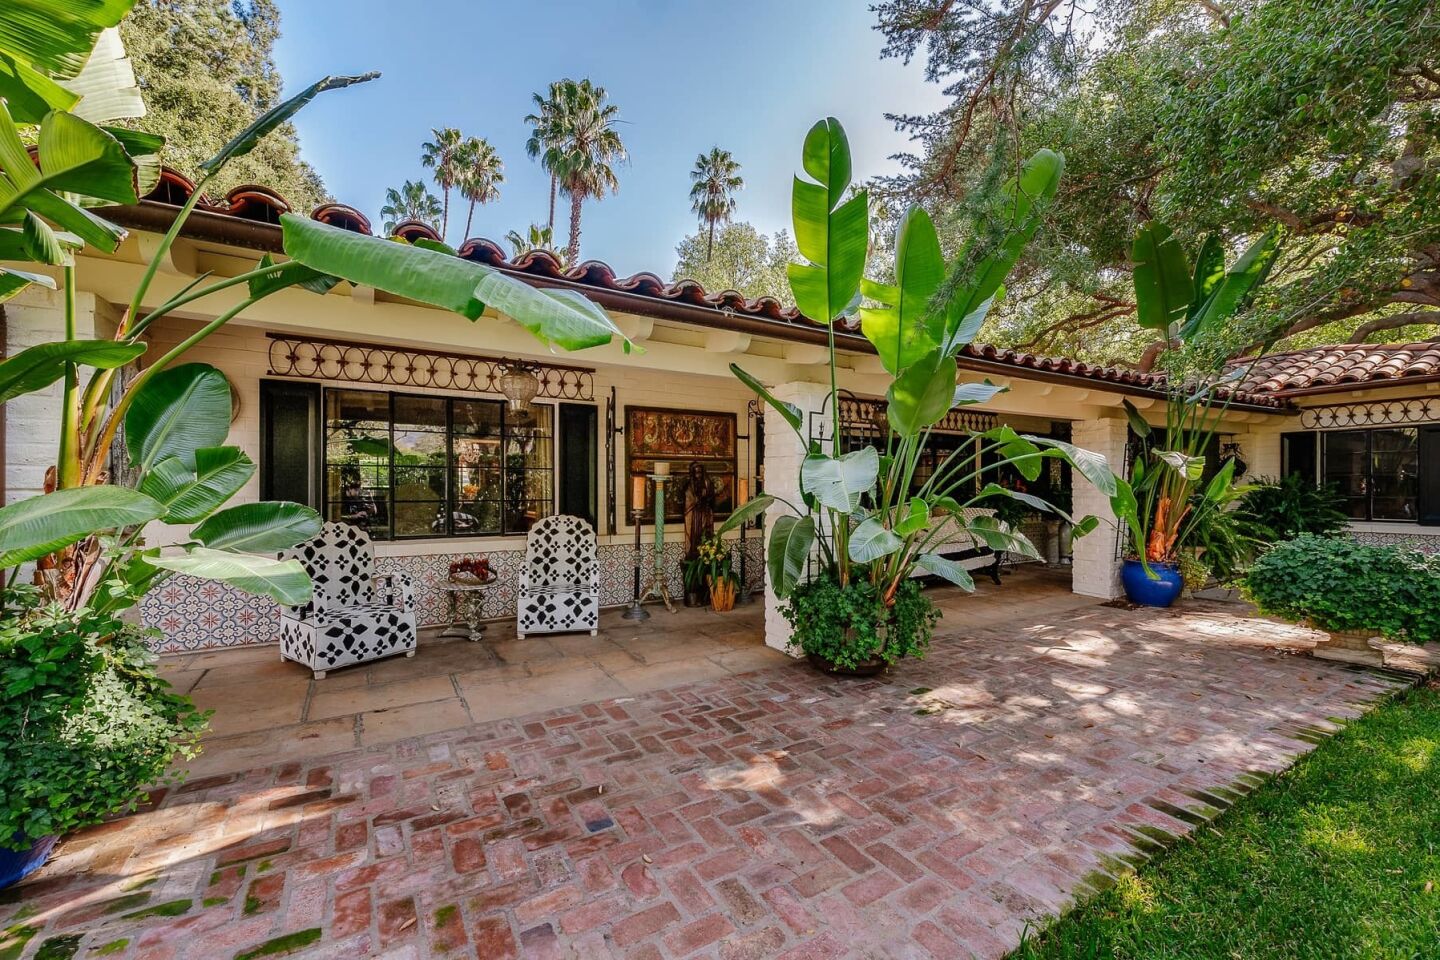 Drew Barrymore and Tom Green's onetime home | Hot Property